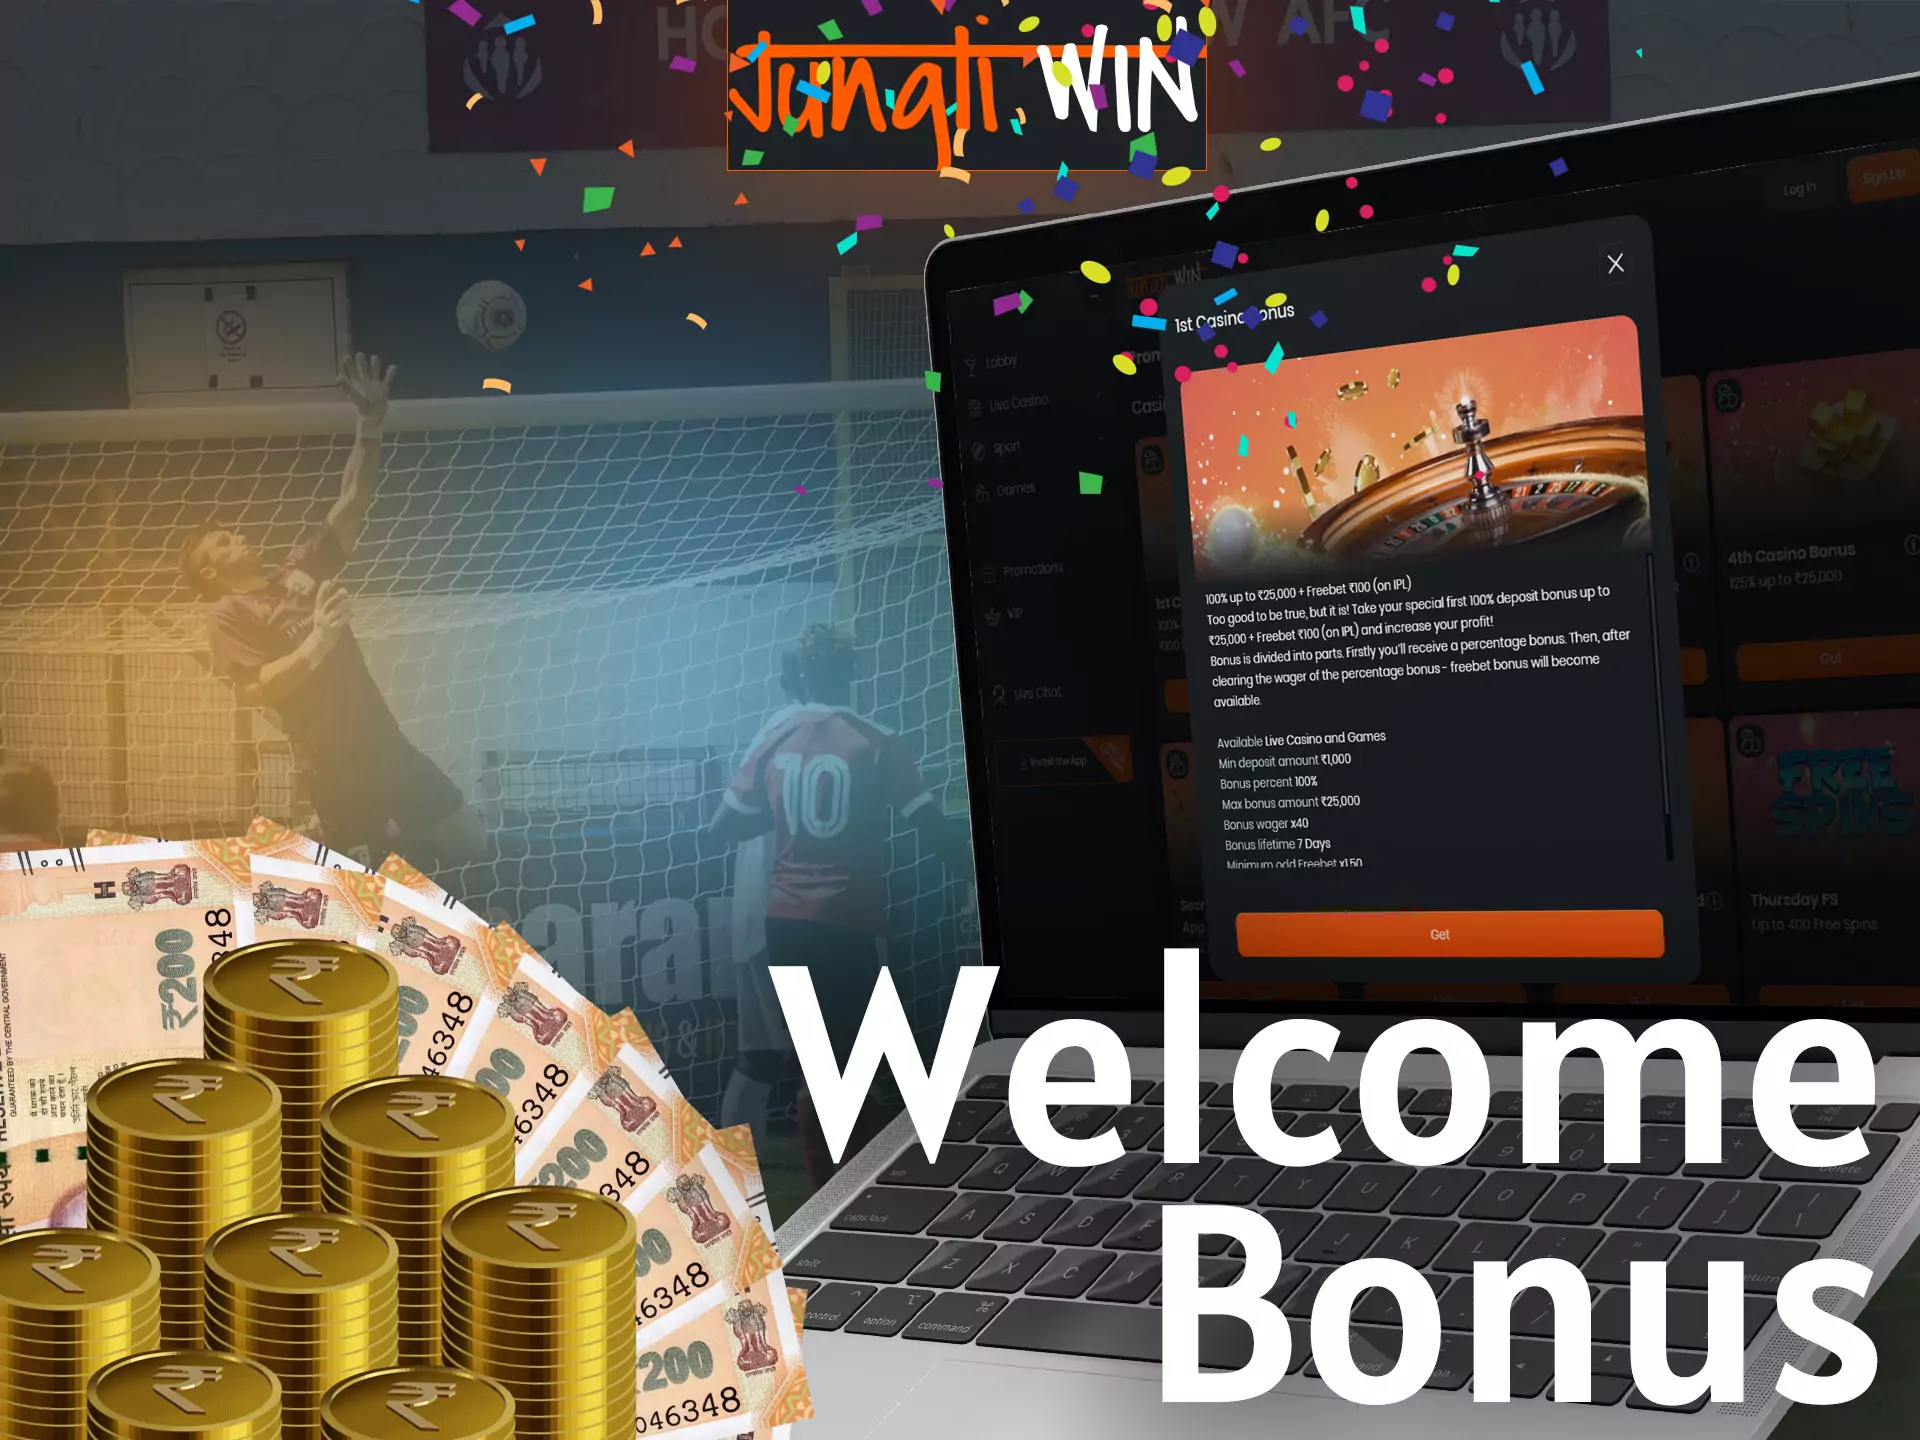 Get a special welcome bonus right after registering on Jungliwin.